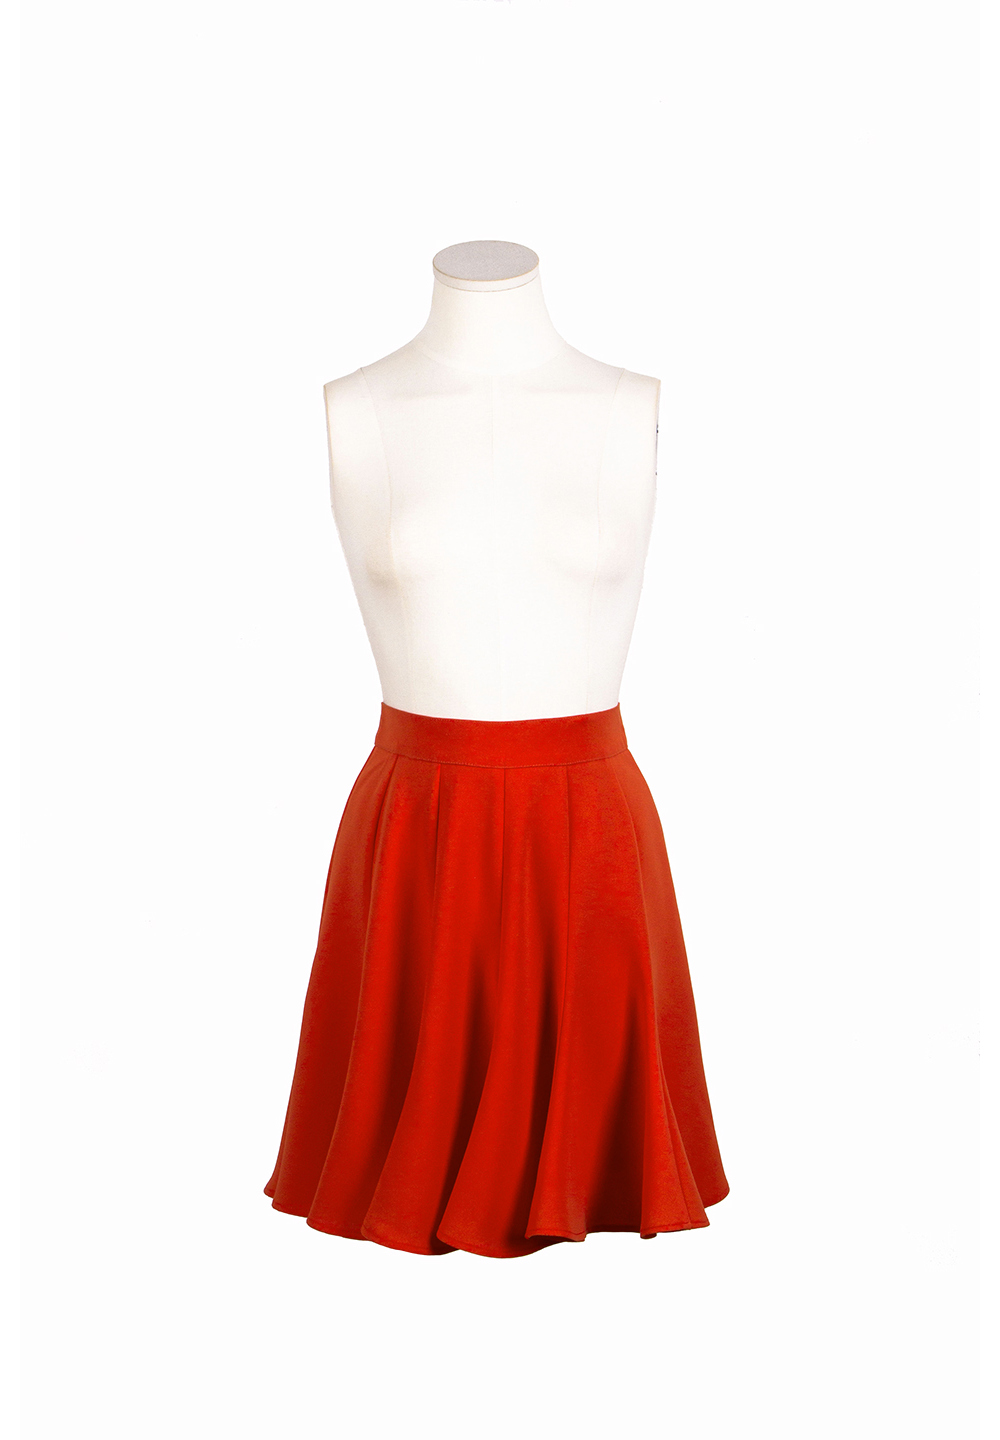 skirt red color image-S2L36